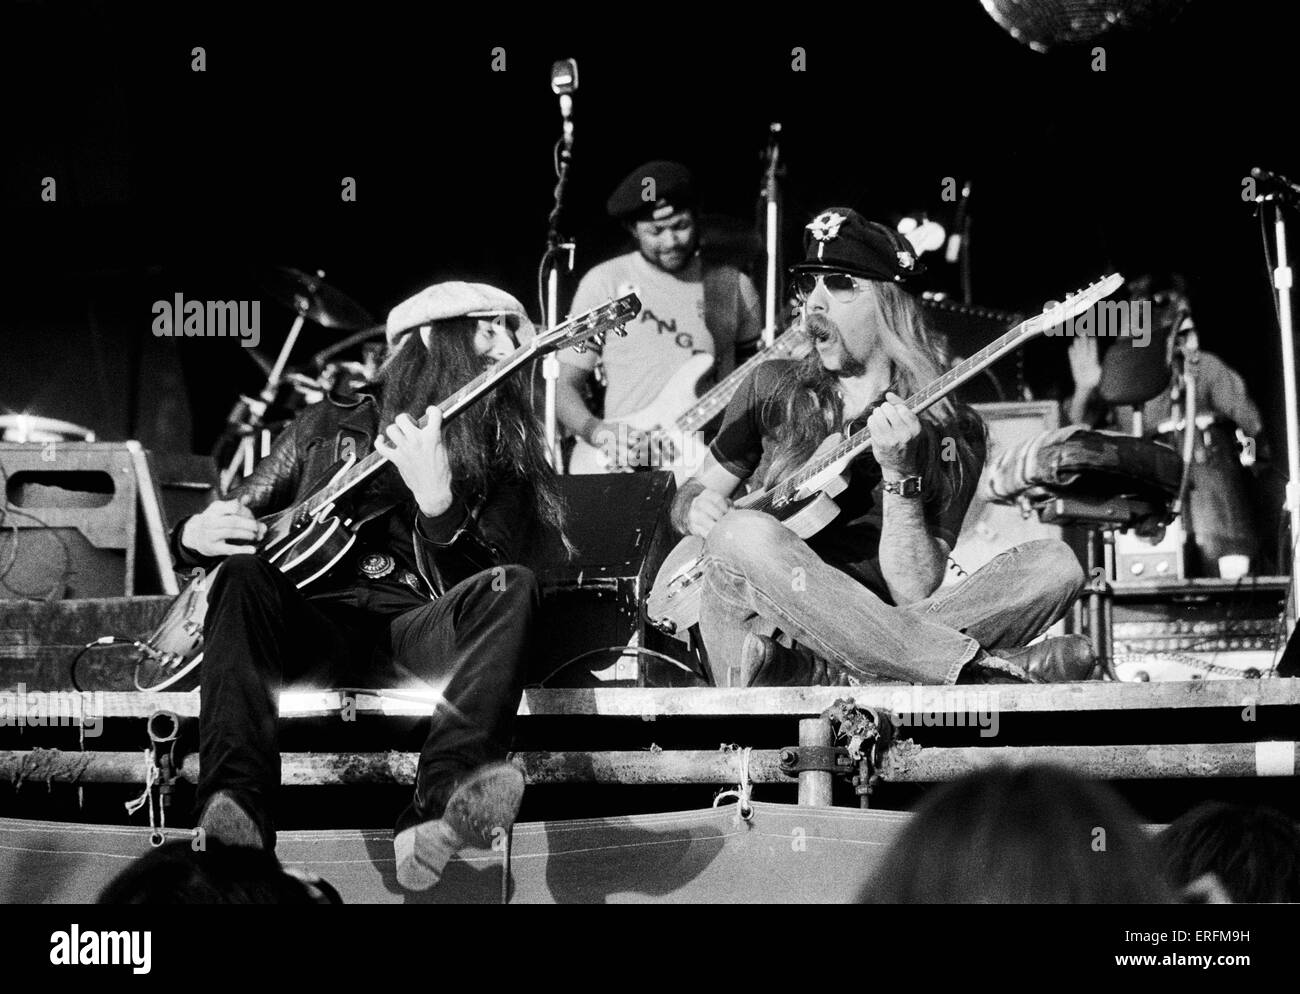 The Doobie Brothers - the American rock group performing at the 1977 Reading Festival. Front: guitarists Patrick Simmons (left) Stock Photo